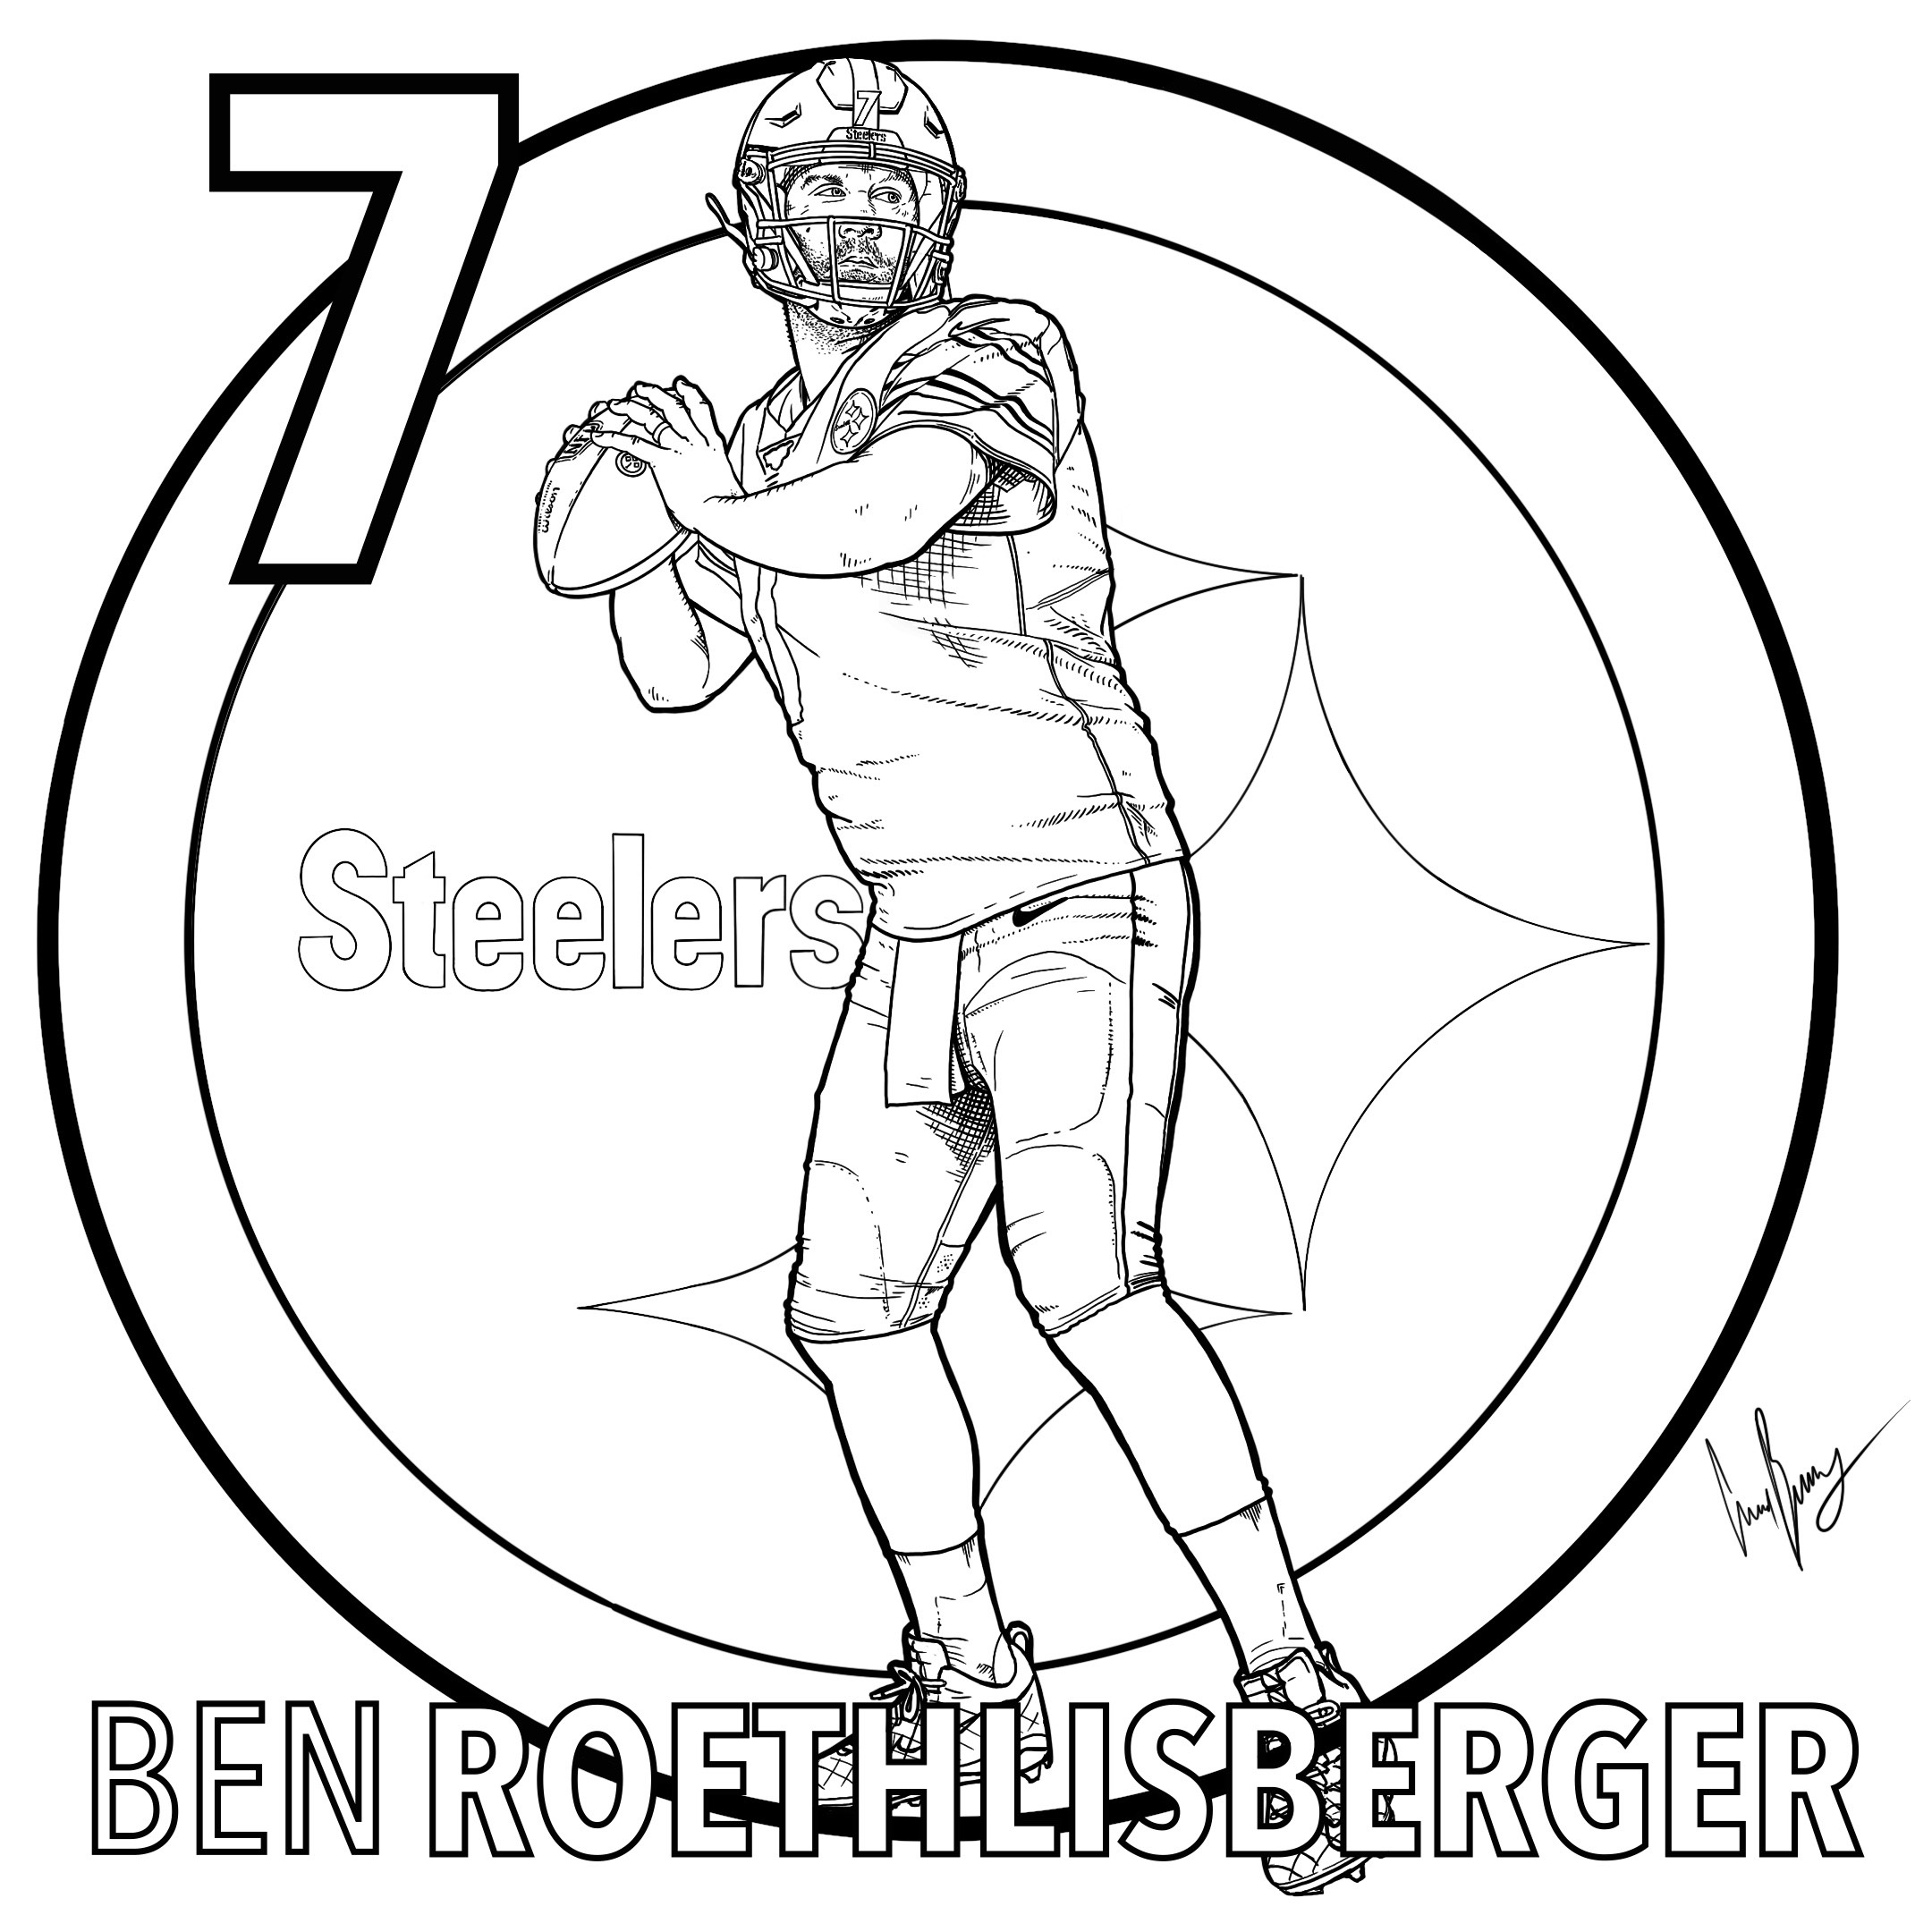 Pittsburgh Steelers Coloring Pages Pittsburgh Steelers Steelers Com